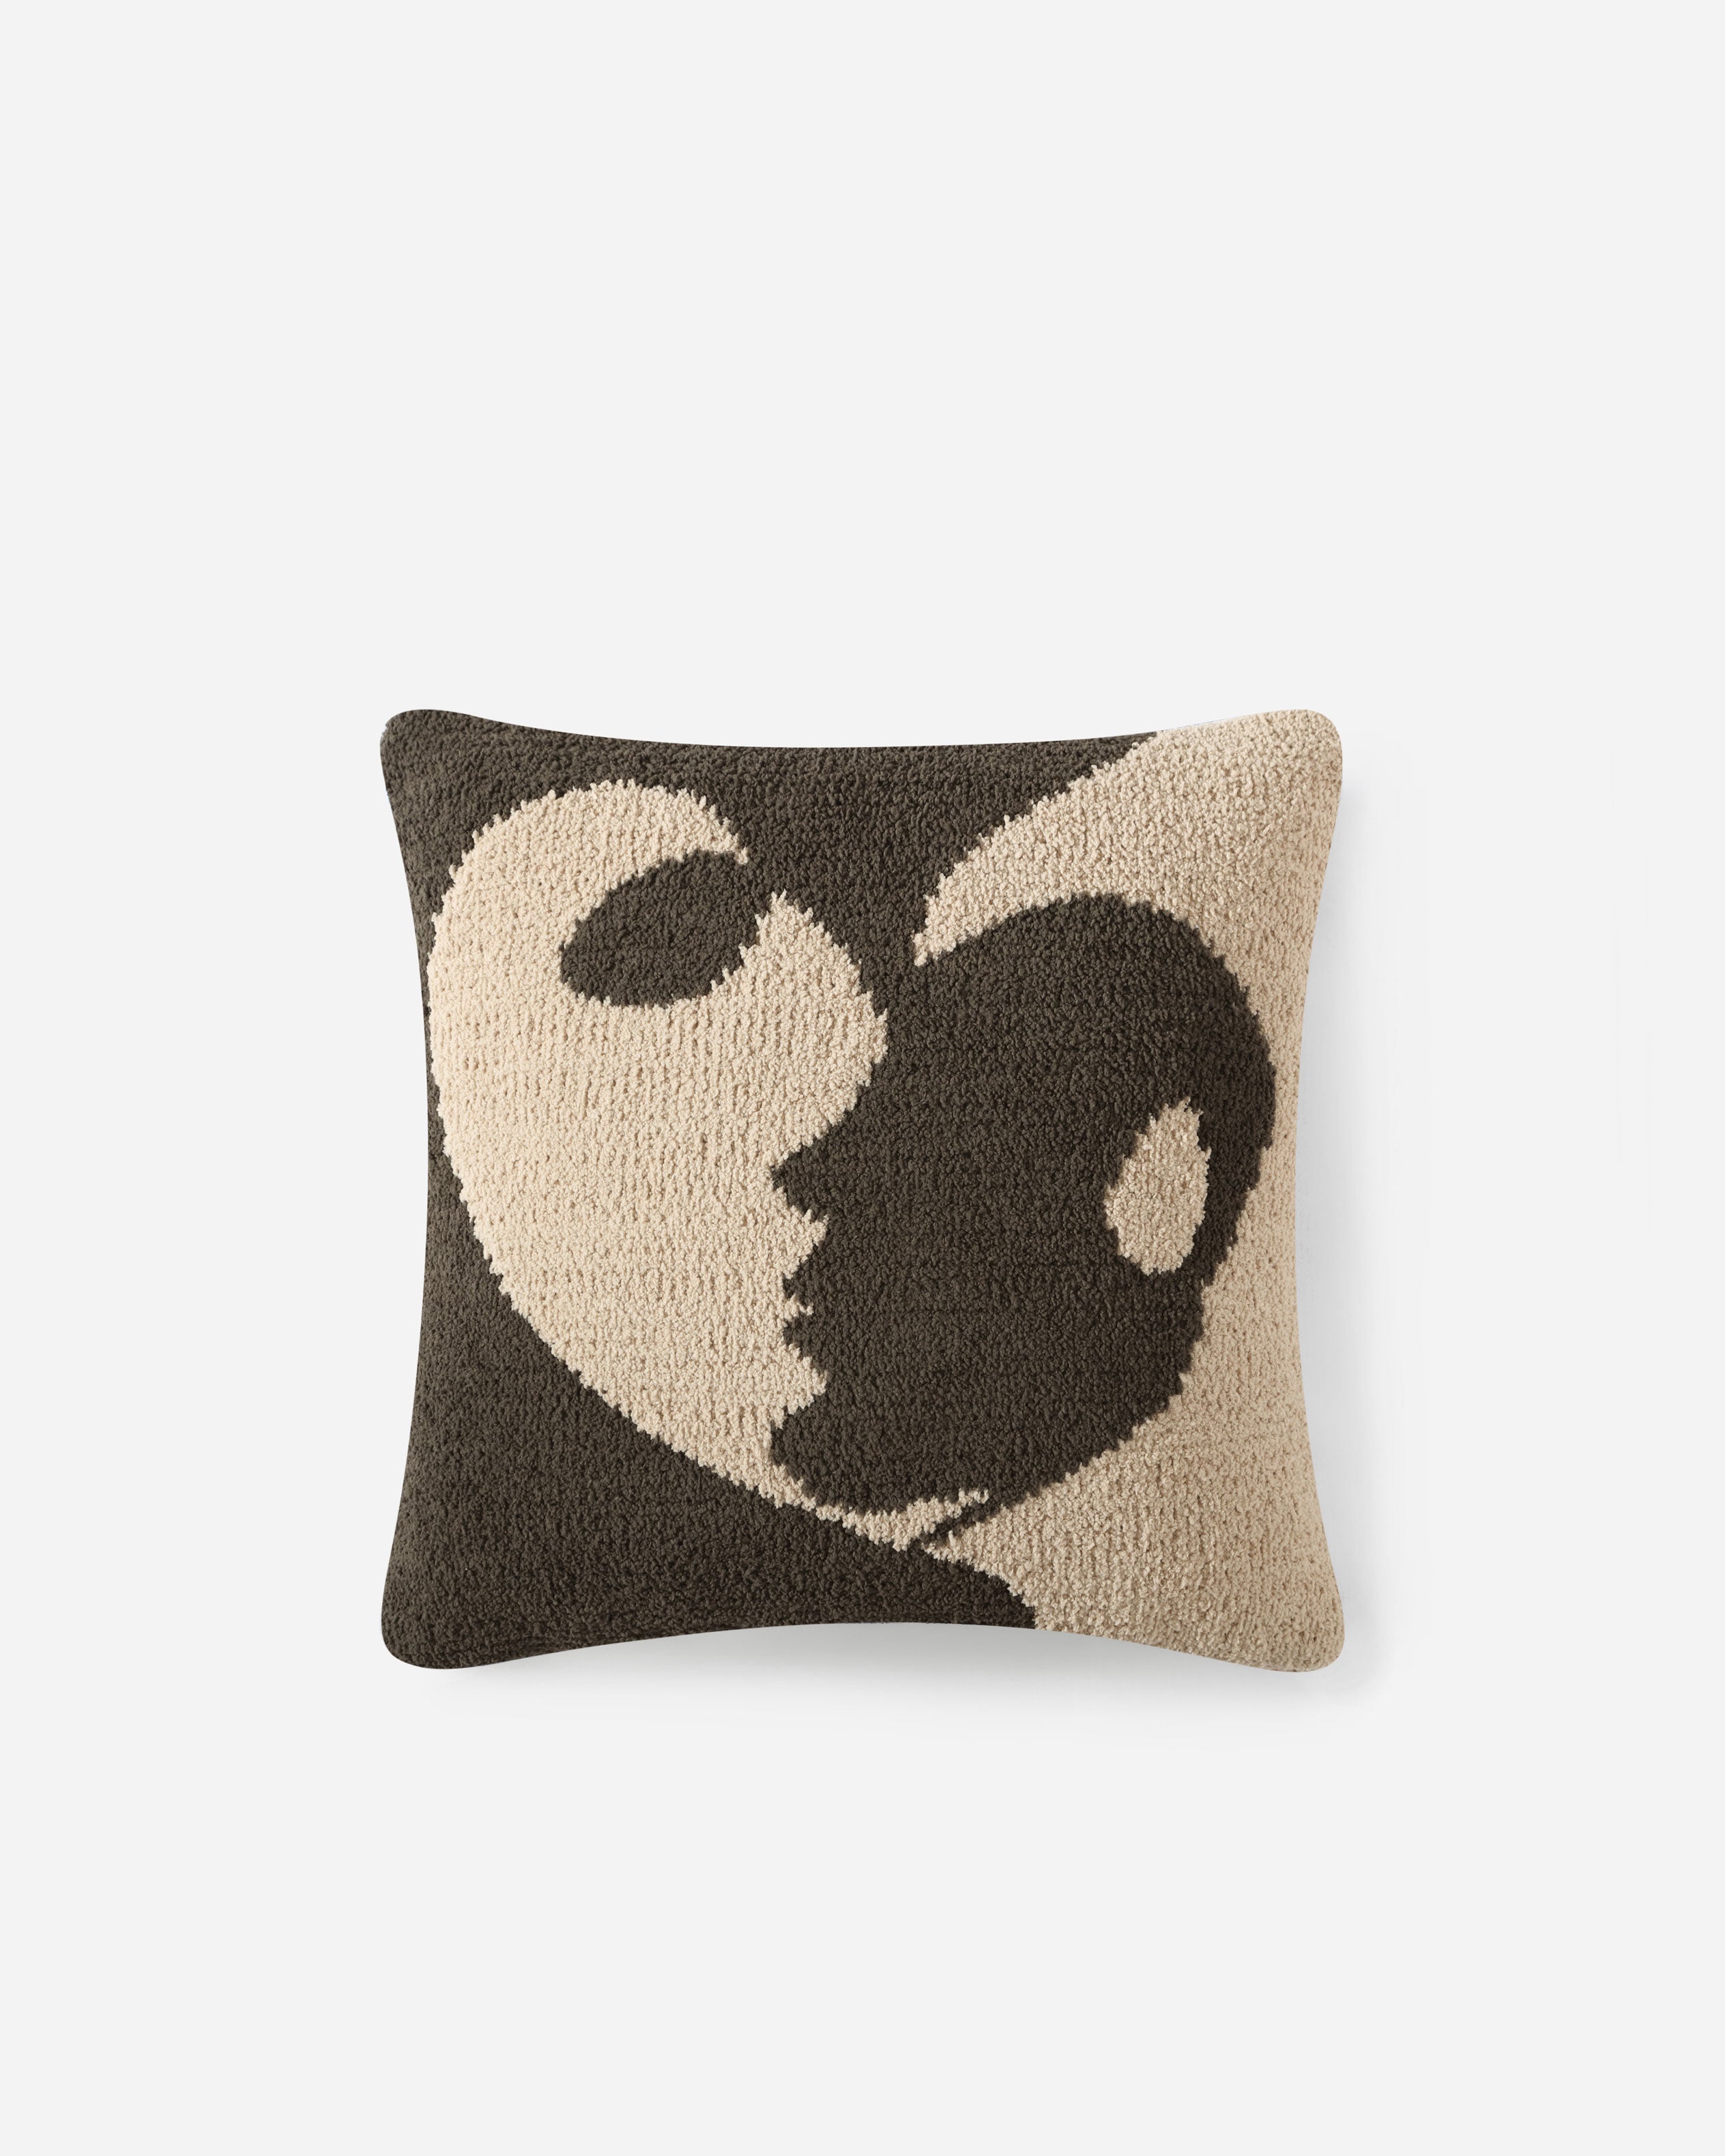 The Faces II Throw Pillow by Sunday Citizen showcases an abstract profile of a face within a heart-like shape. Light and dark brown hues form an optical illusion on a pure white backdrop, and the memory foam filling provides unparalleled comfort. It is OEKO-TEX® certified for quality and safety.